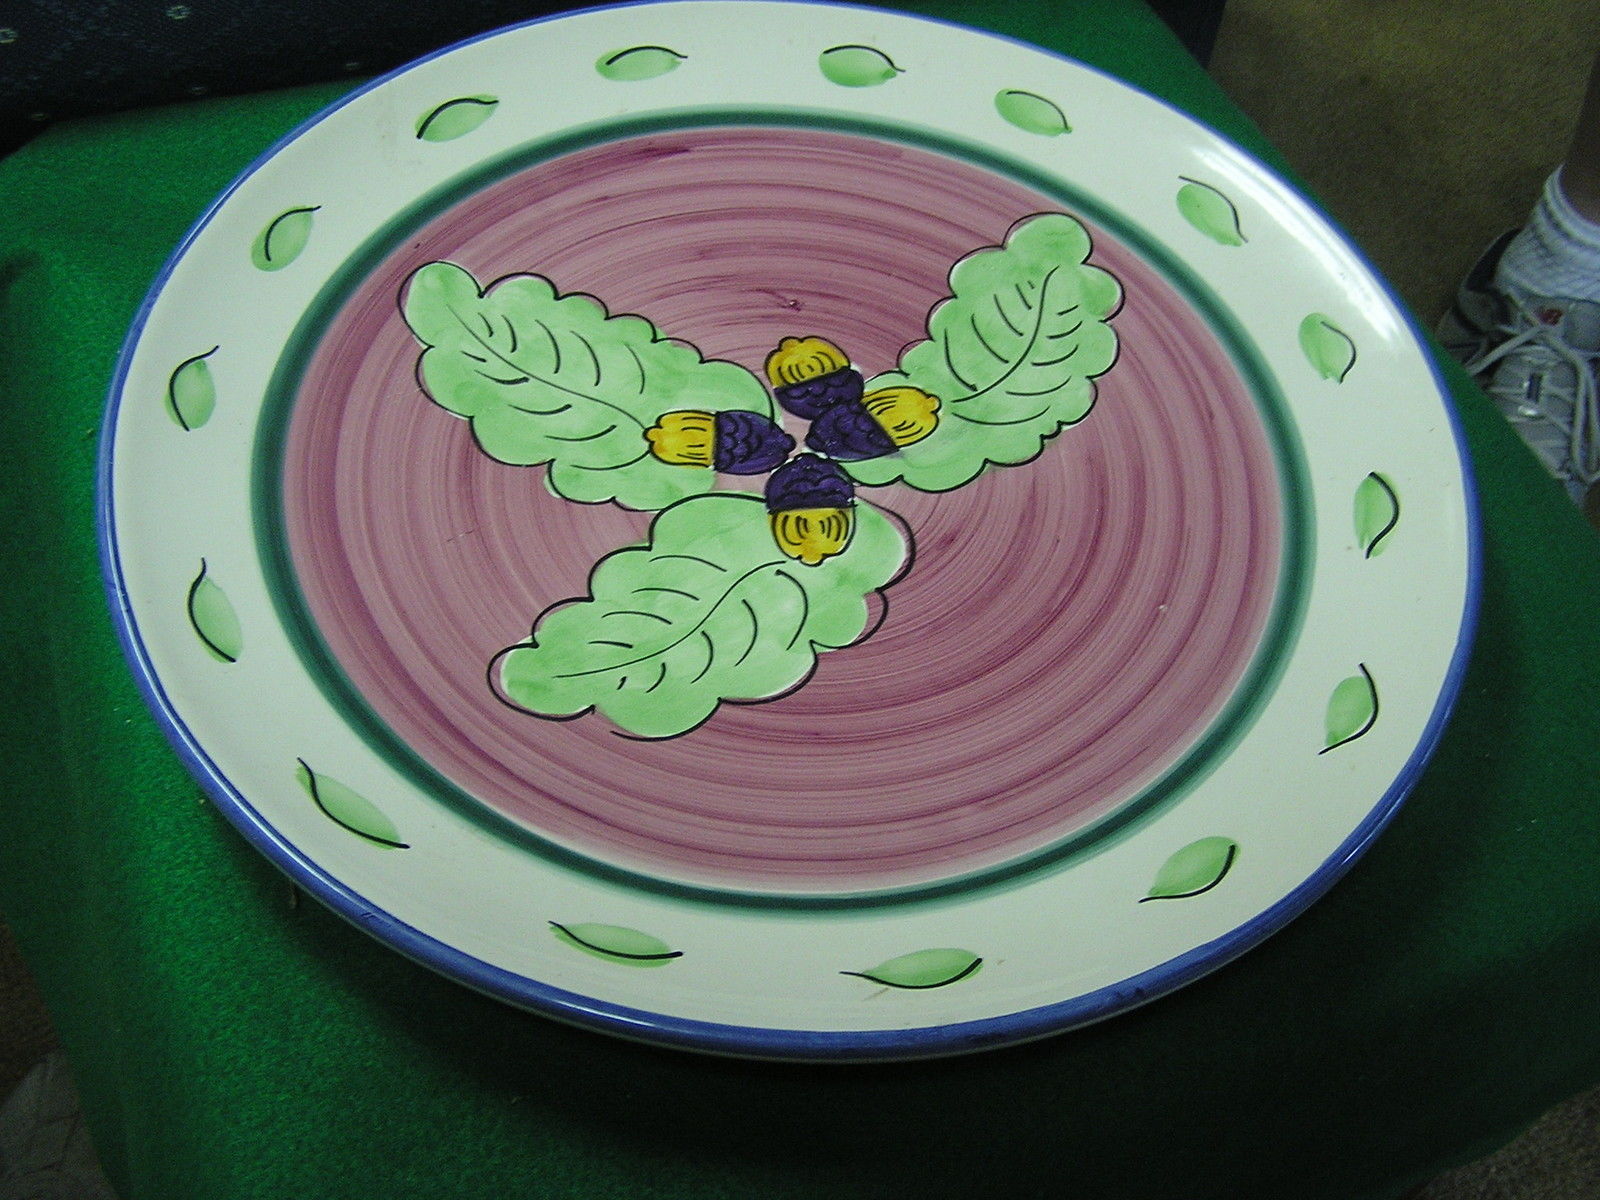 Outstanding PIER 1 Large Heavy SERVING PLATTER Made in Italy 16" diameter--SALE - $16.63